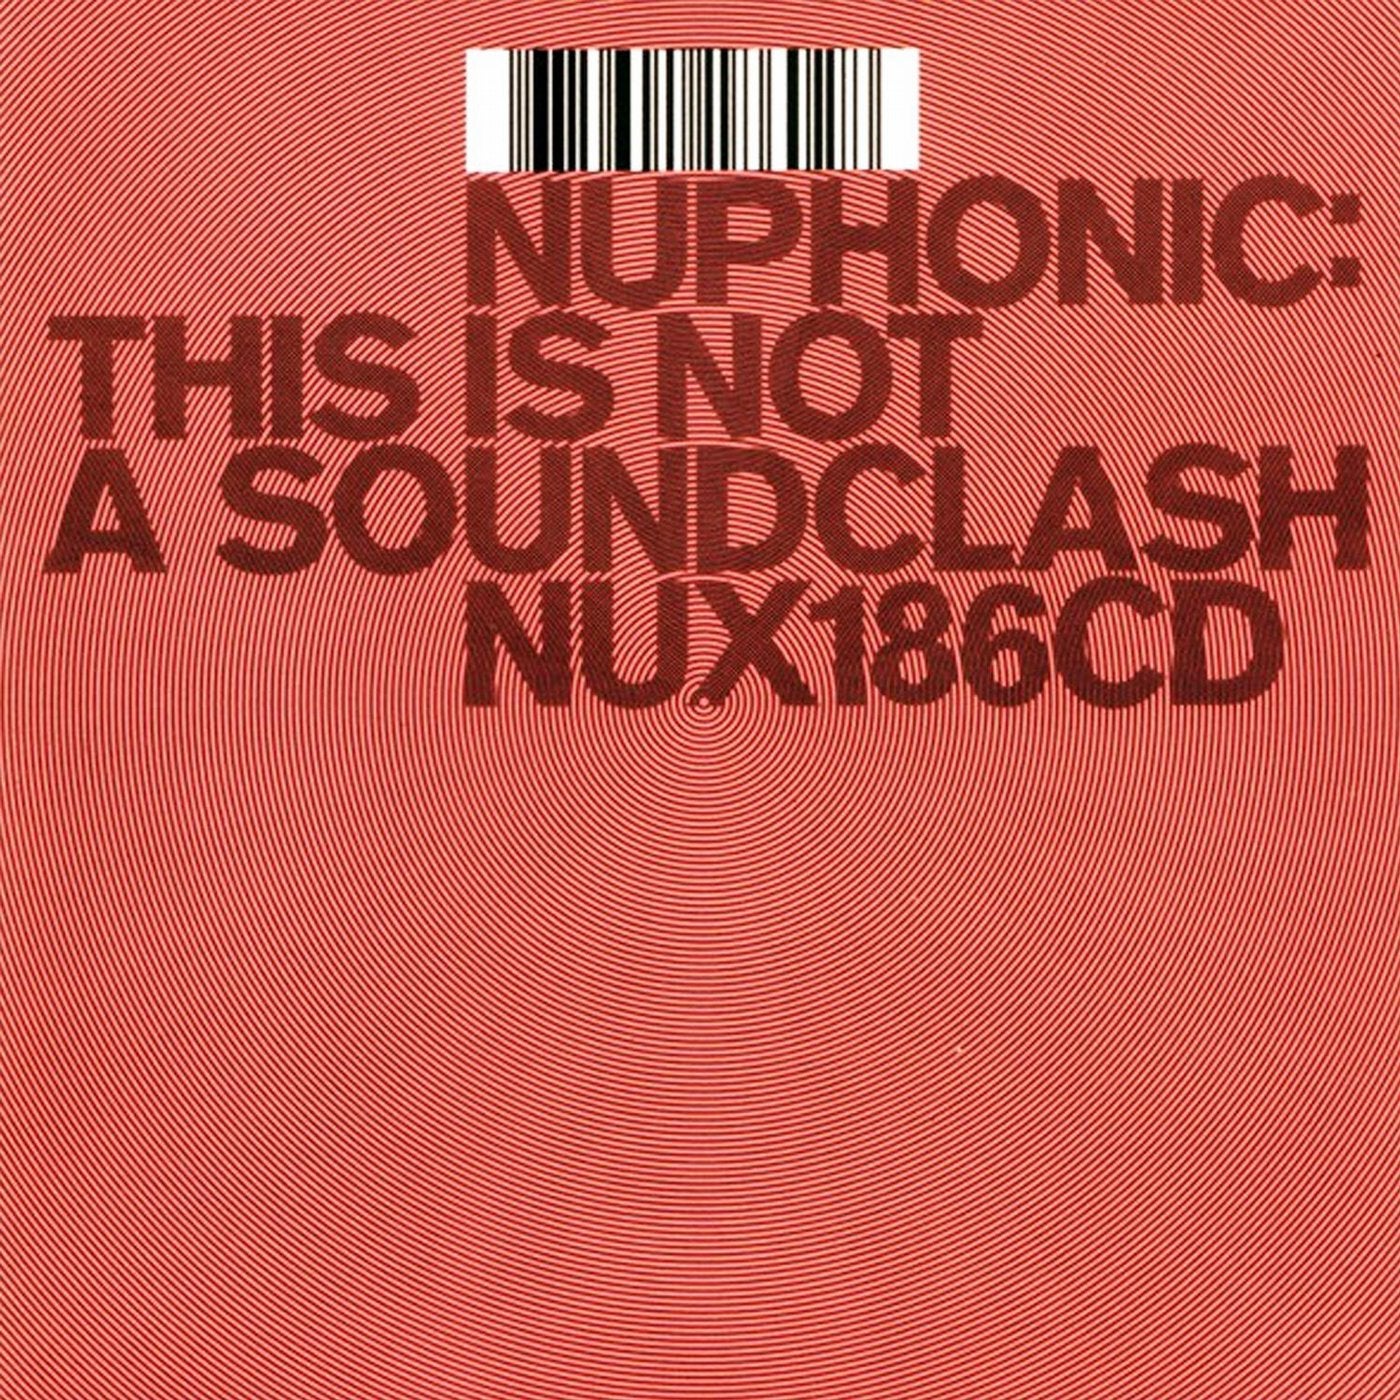 Nuphonic: This ls Not A Soundclash